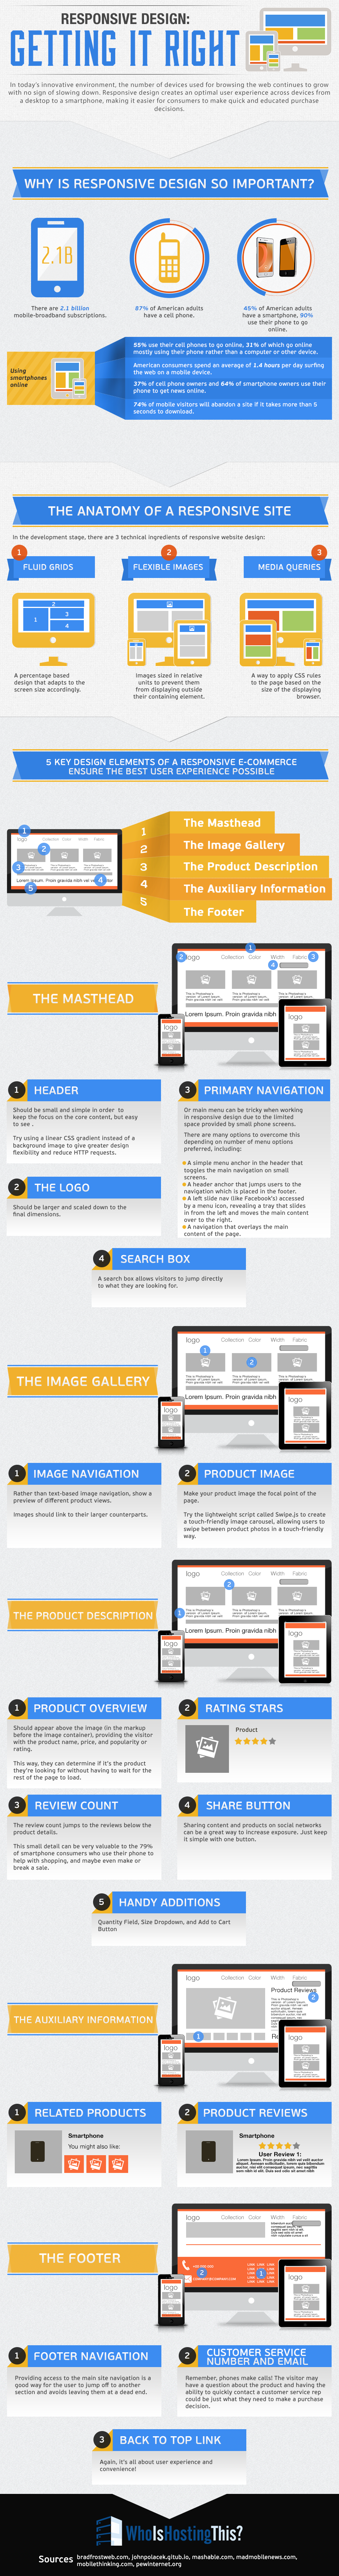 Responsive Design: Getting It Right